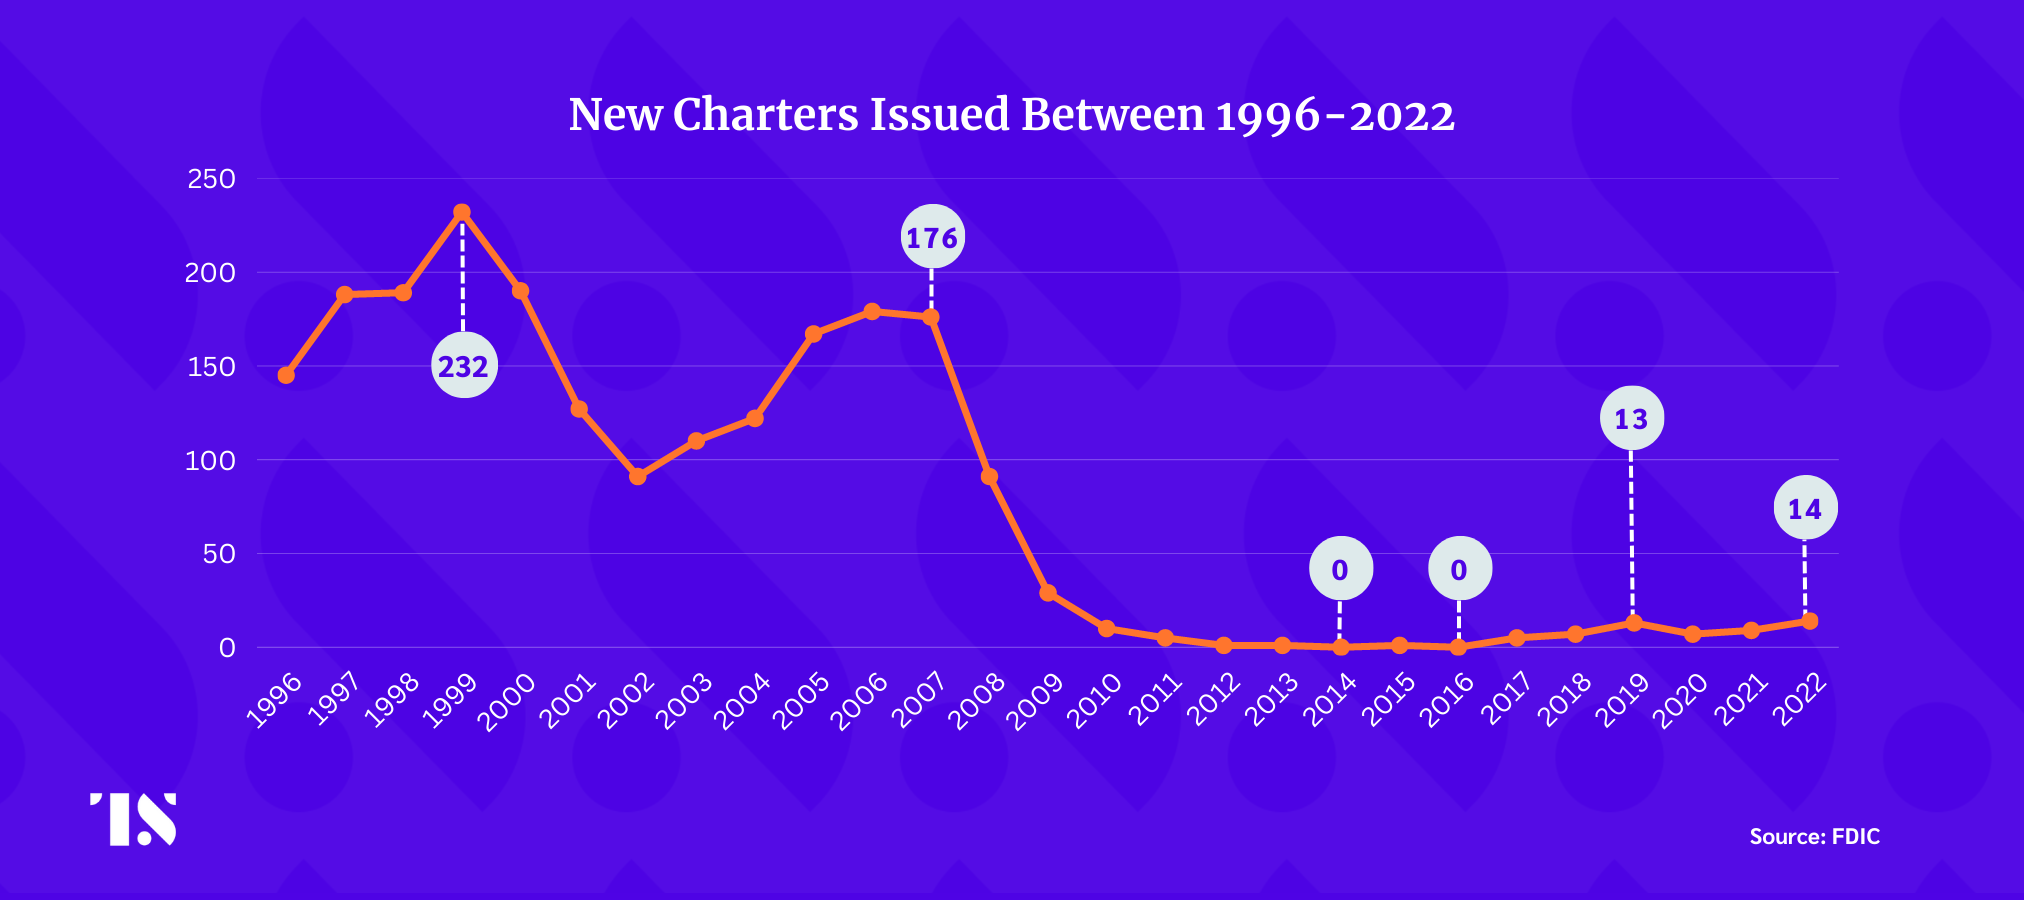 Trend line showing the number of new charters issued between 1996 to 2022 to banks in America. The graph shows that new charters hit zero in 2014 and 2016 and  have only just started rising, while numbers of new charters was much higher before the 2007 and 2008 crisis. 